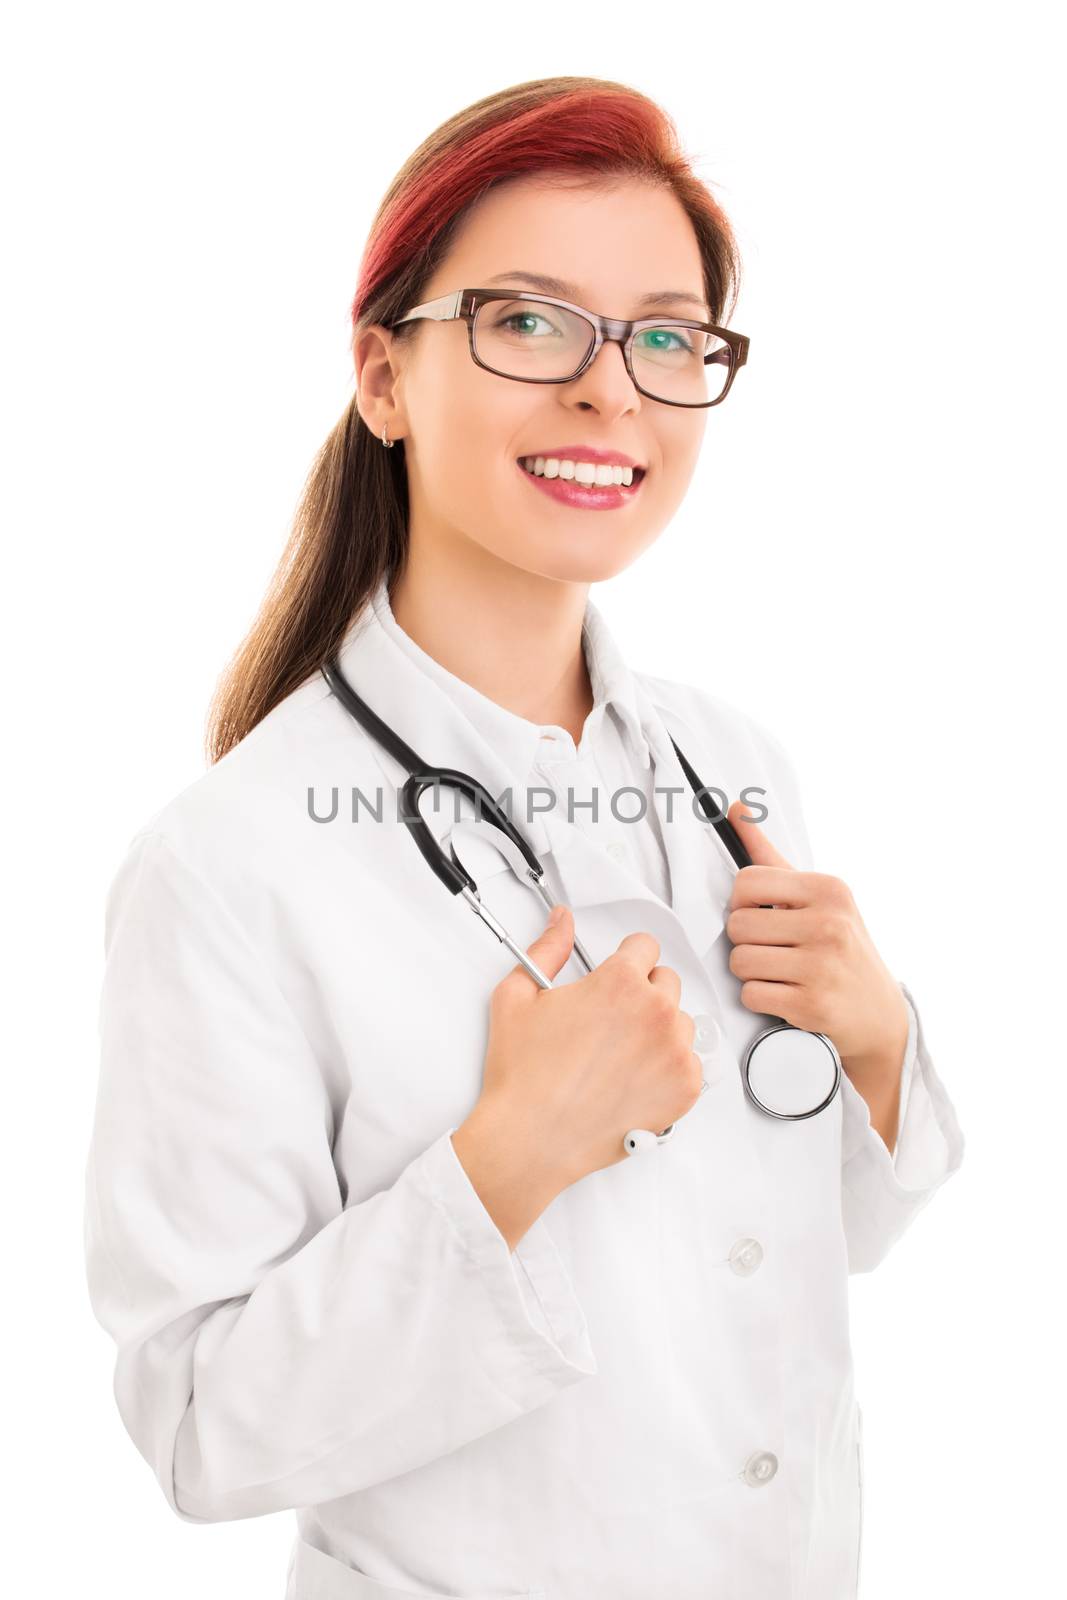 Portrait of a female doctor holding a stethoscope by Mendelex